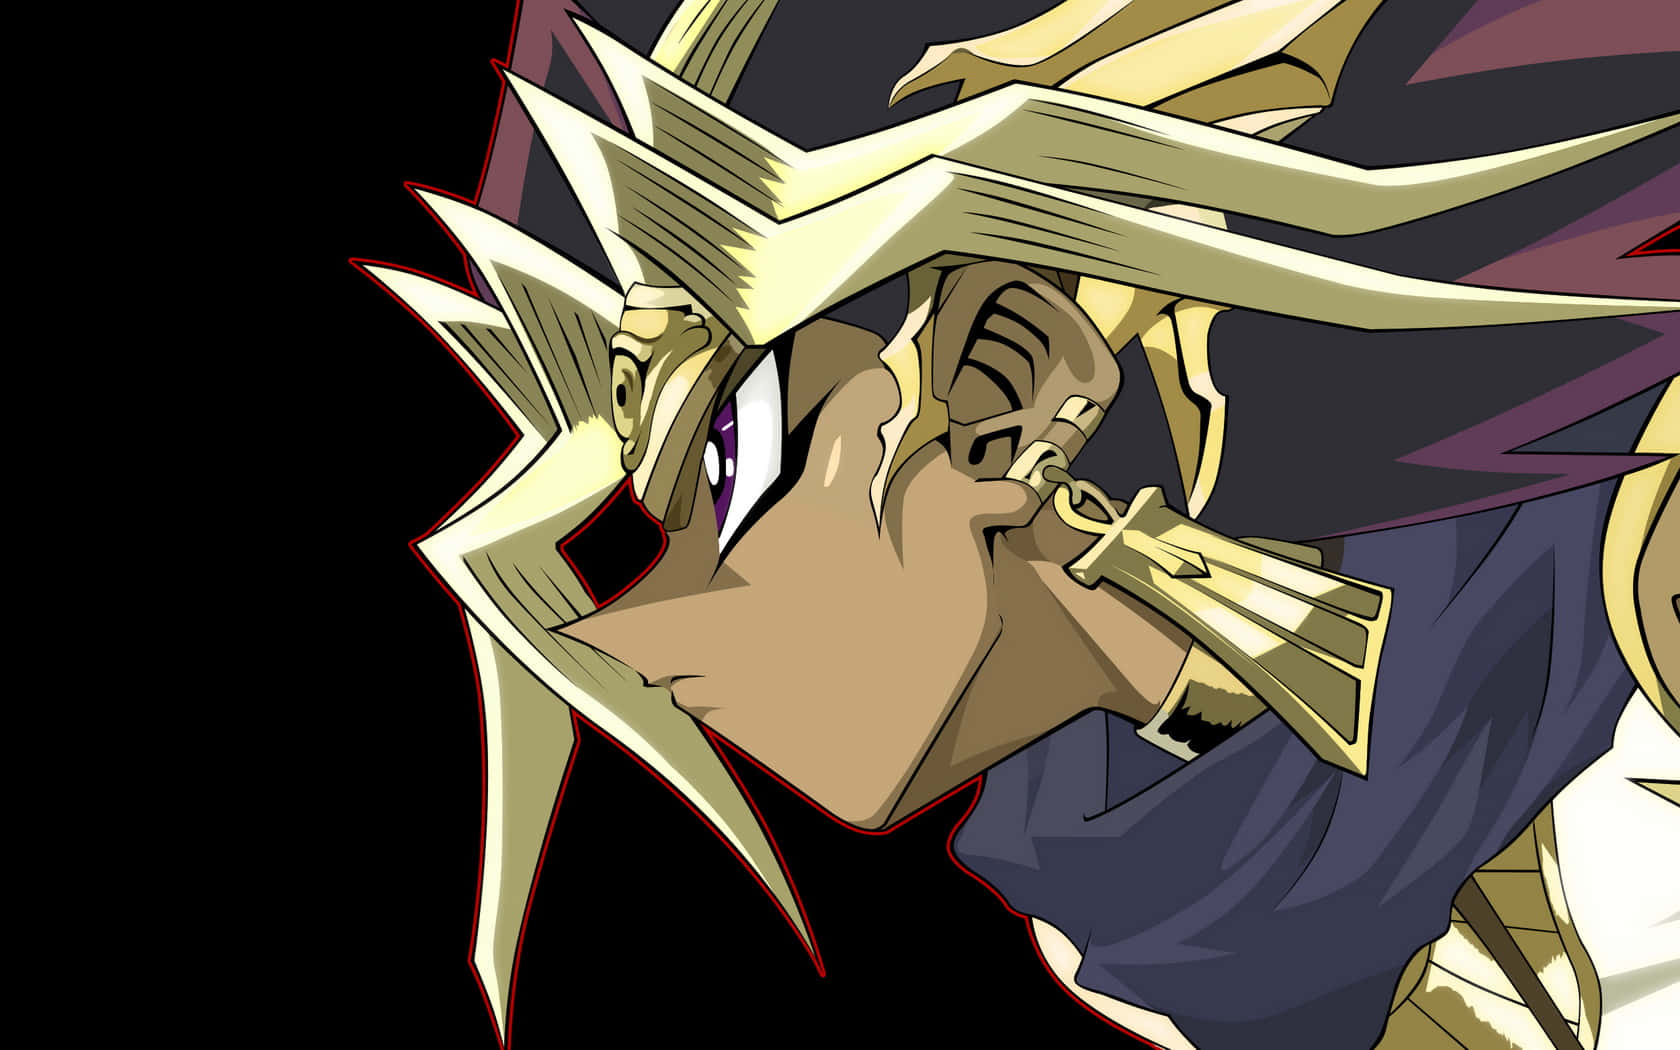 Caption: Pharaoh Atem, the ancient ruler and protagonist in Yu-Gi-Oh! Wallpaper